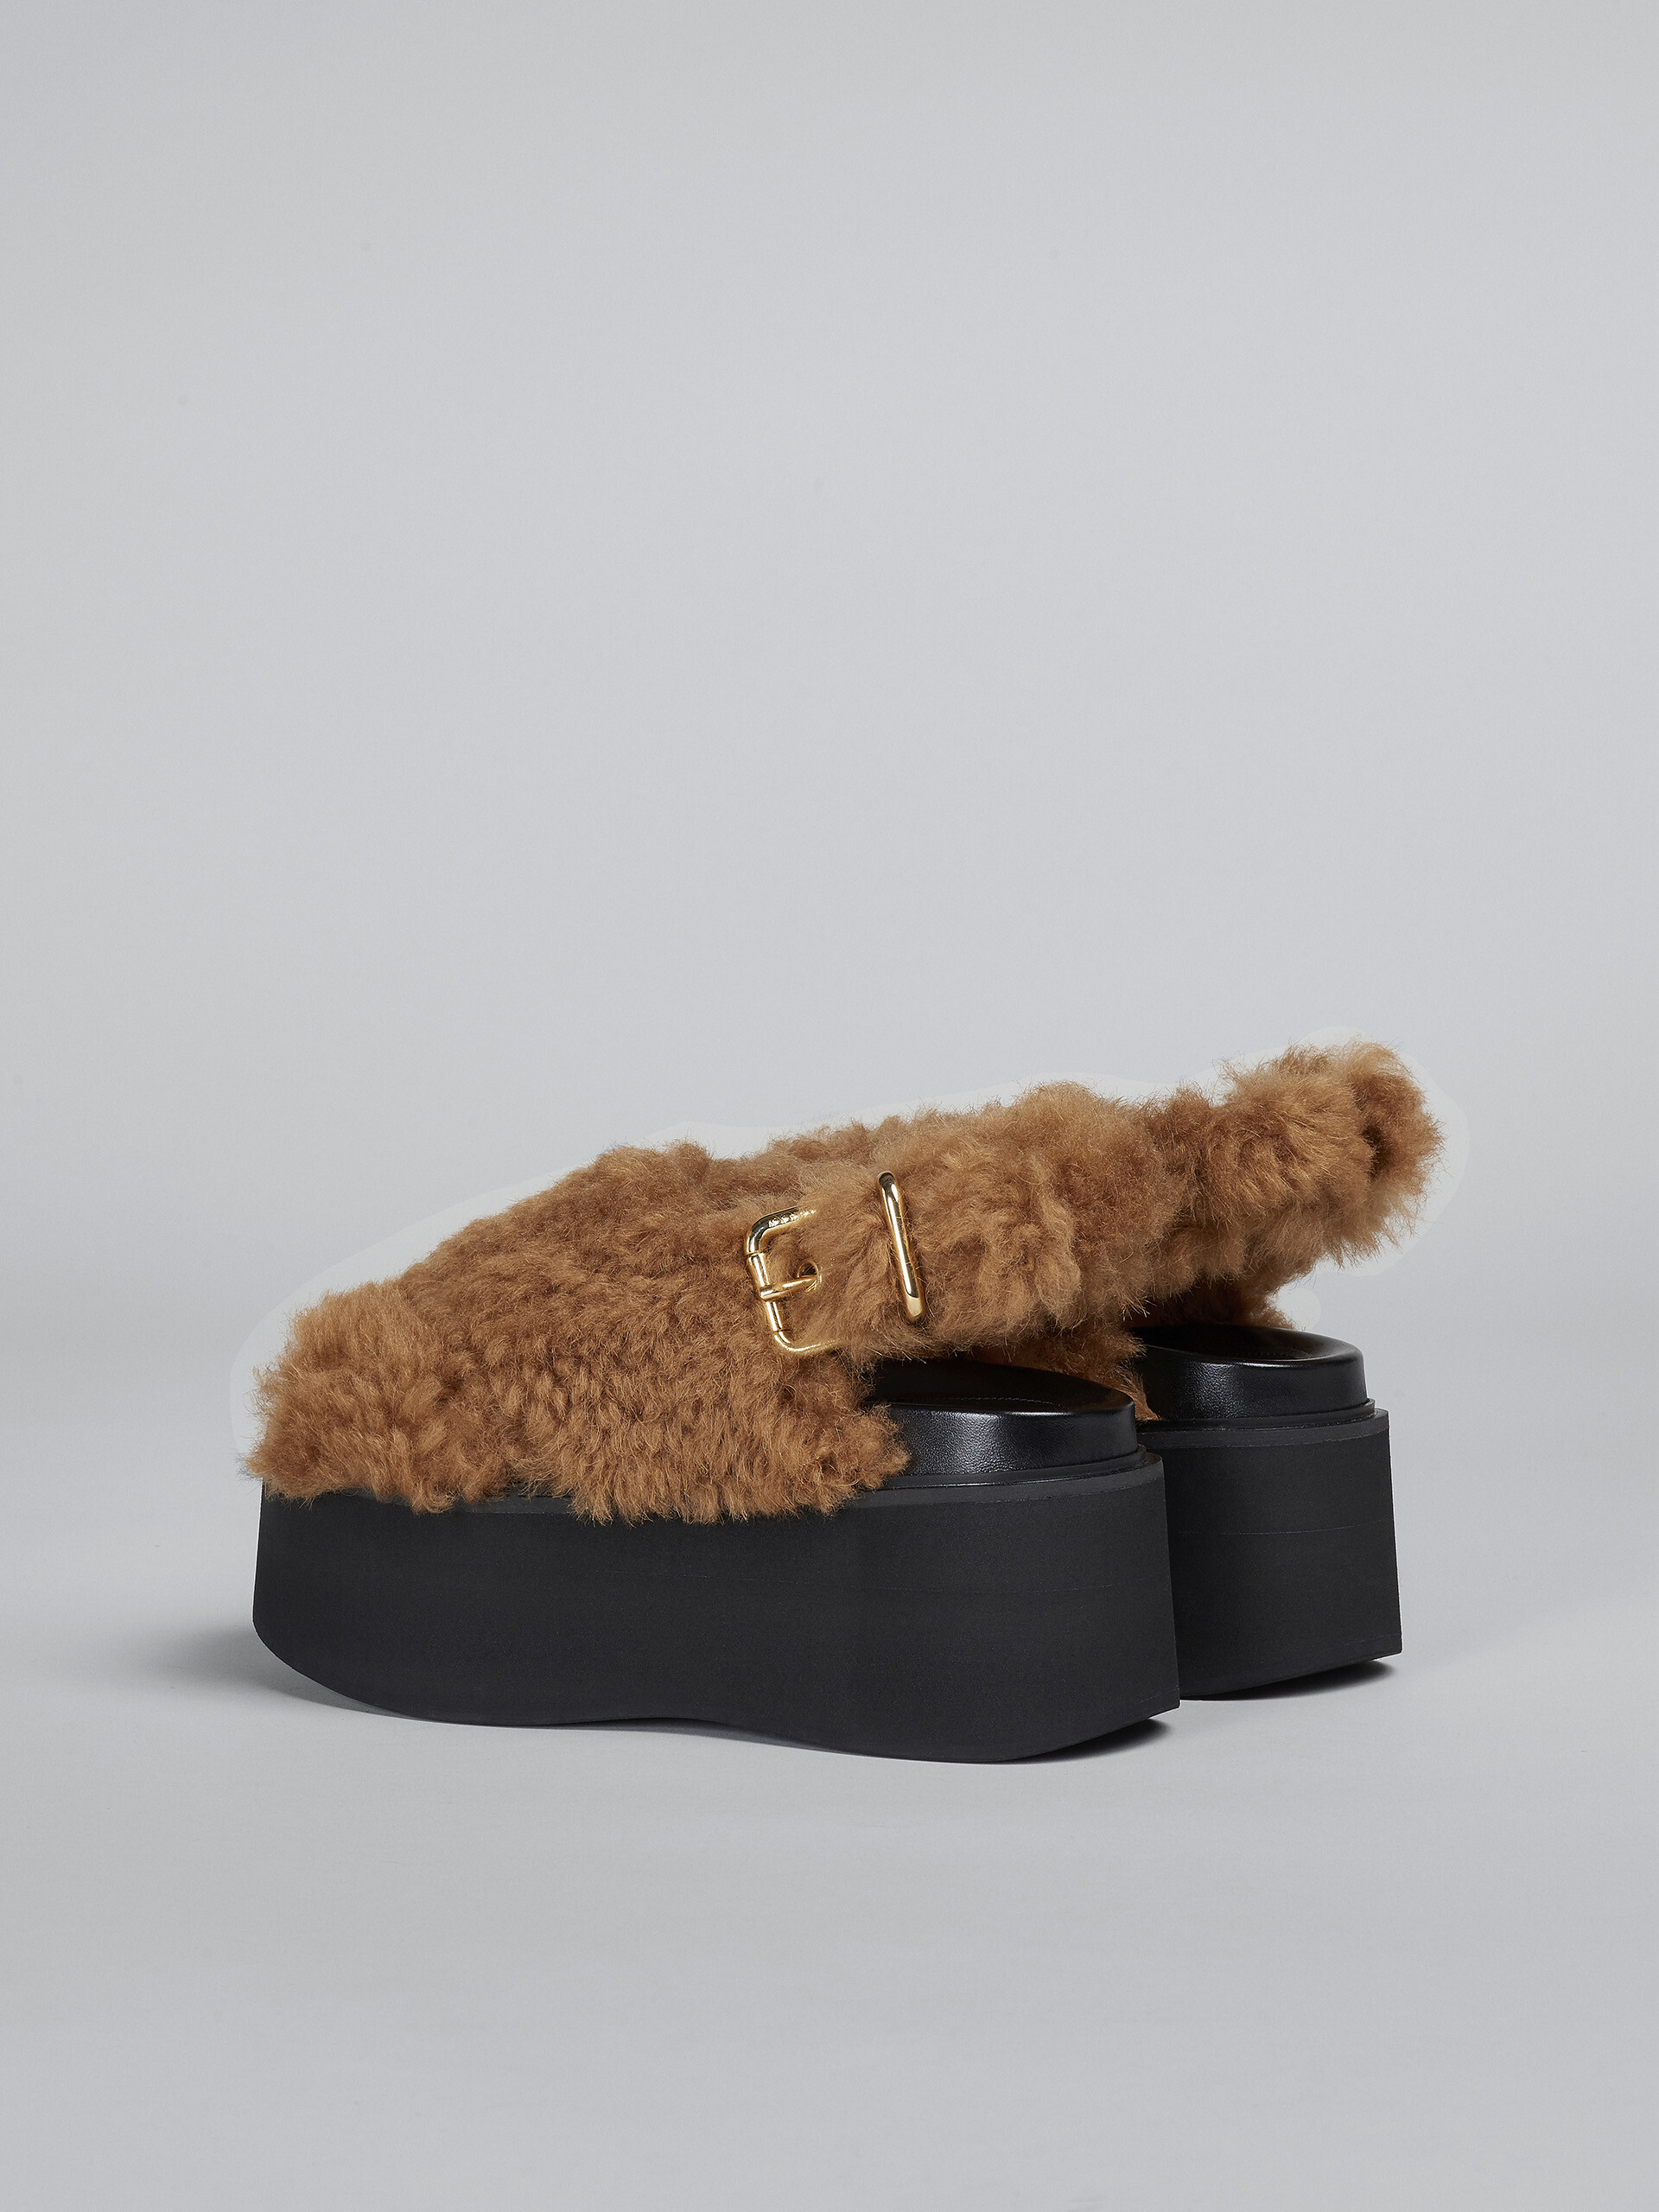 Shearling wedge - Sandals - Image 3